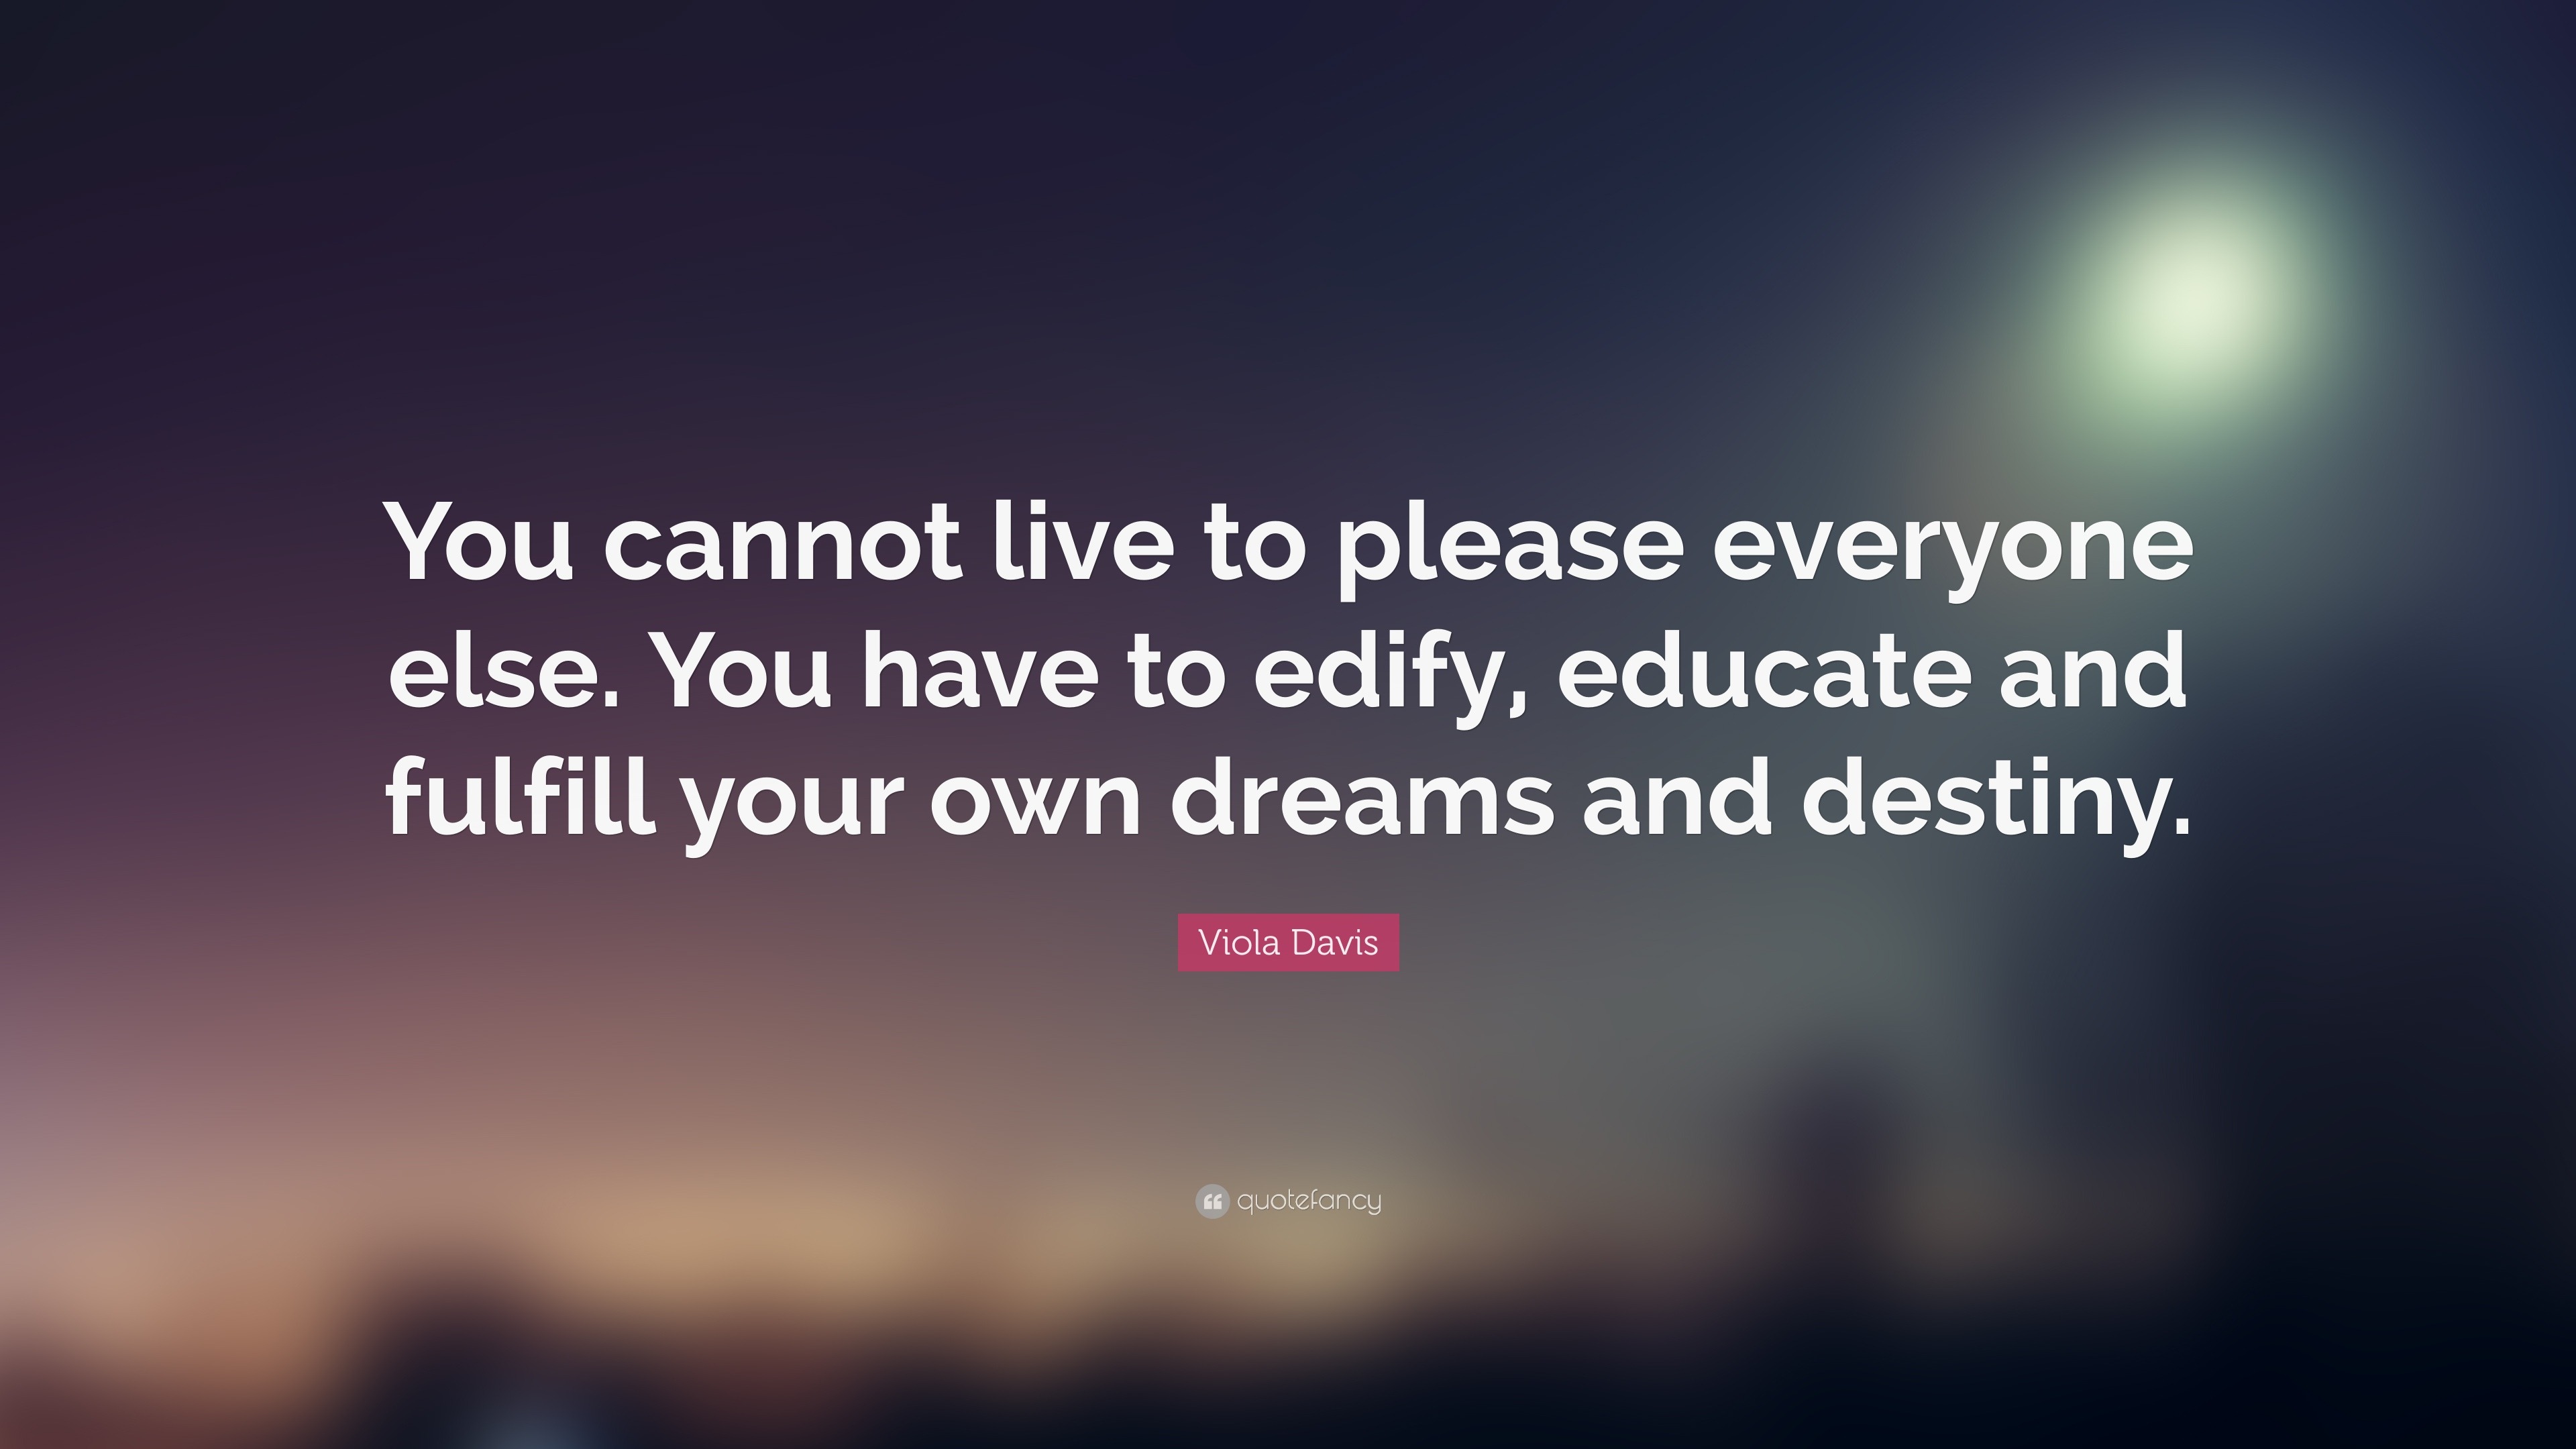 Viola Davis Quote: “You cannot live to please everyone else. You have ...